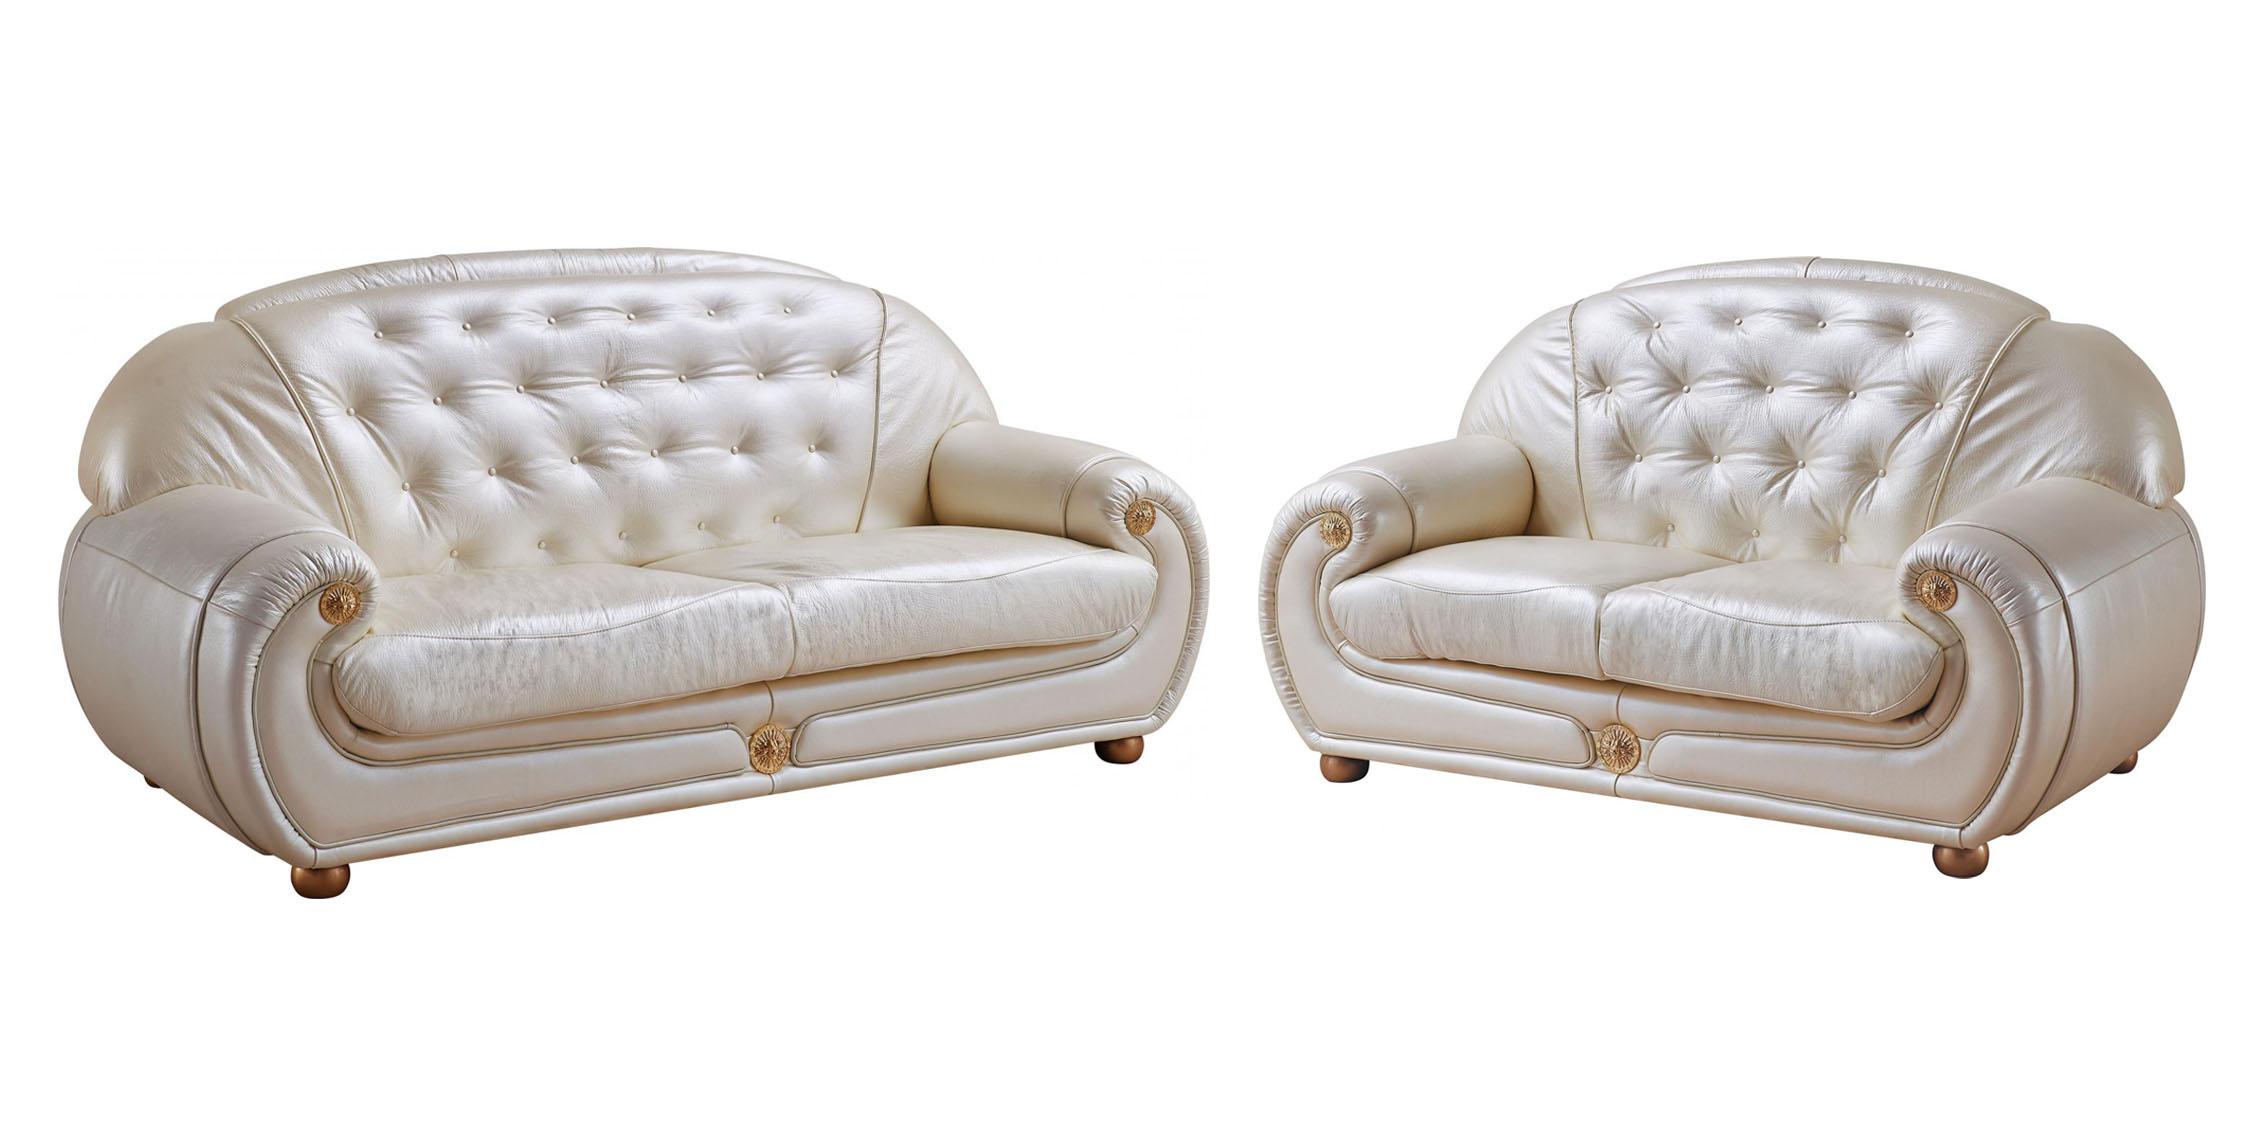 Contemporary Sofa and Loveseat Set Giza ESF Giza Beige-2PC in Light Beige Top grain leather